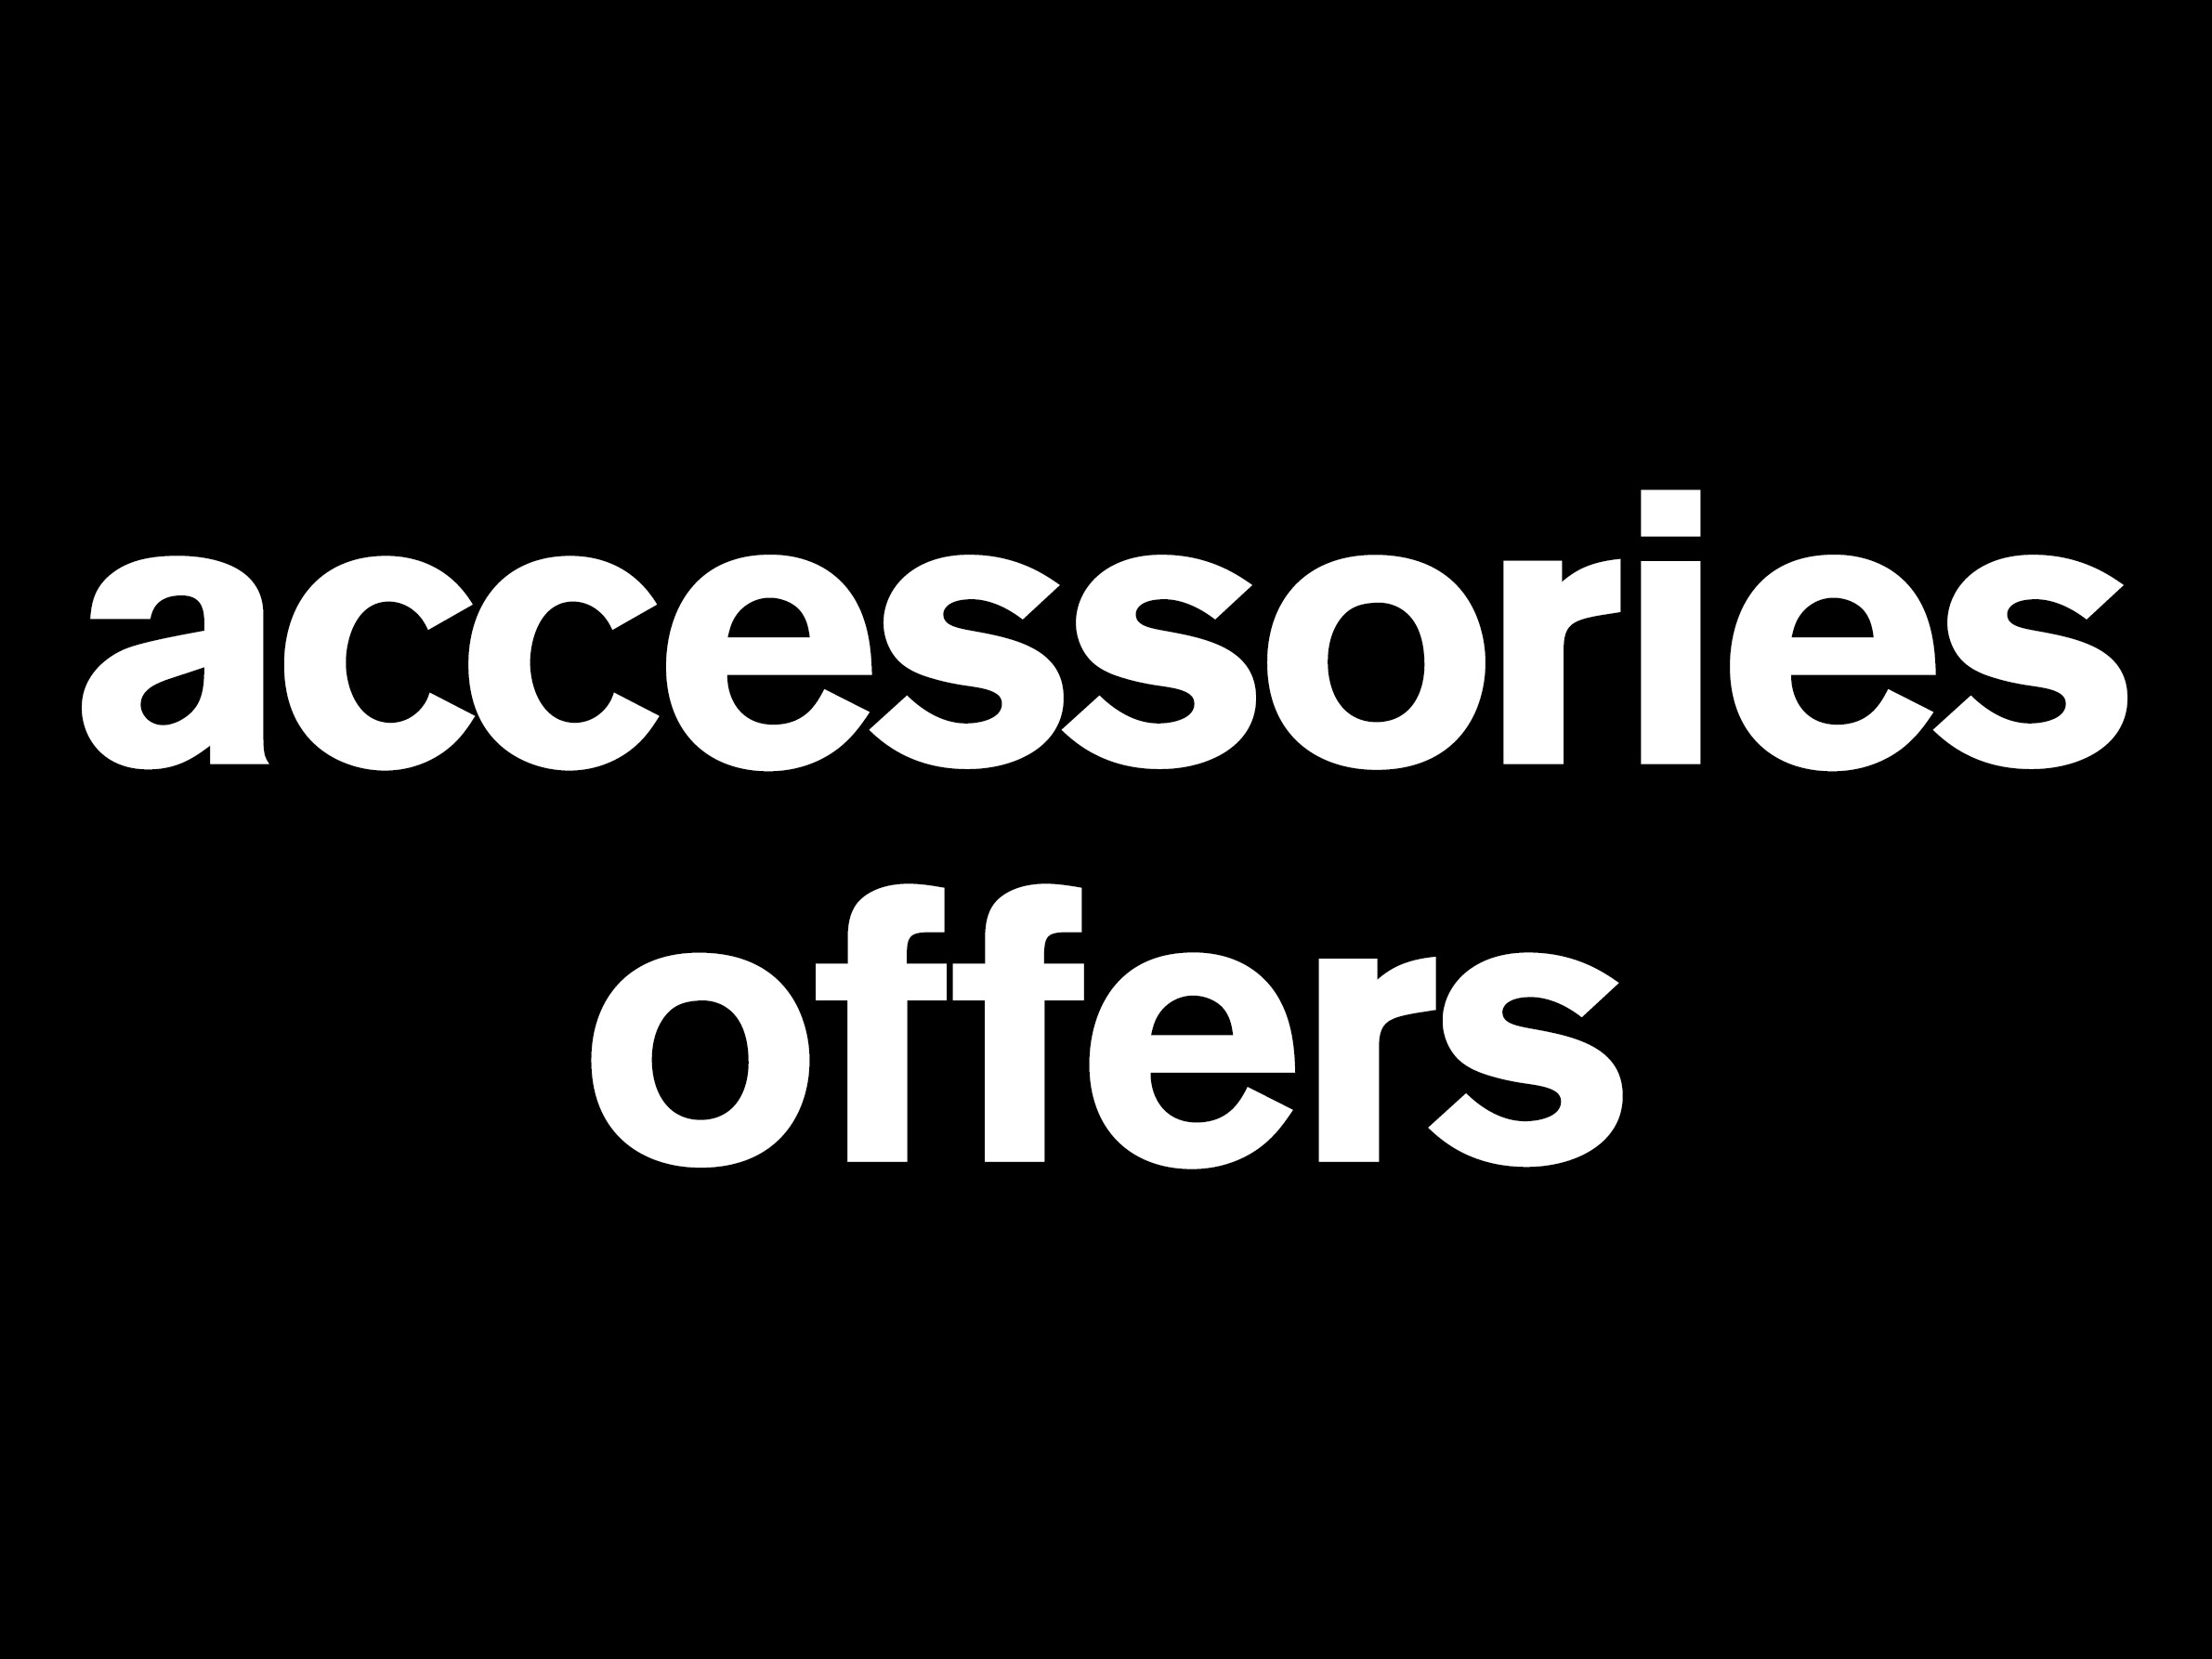 Accessories Offers